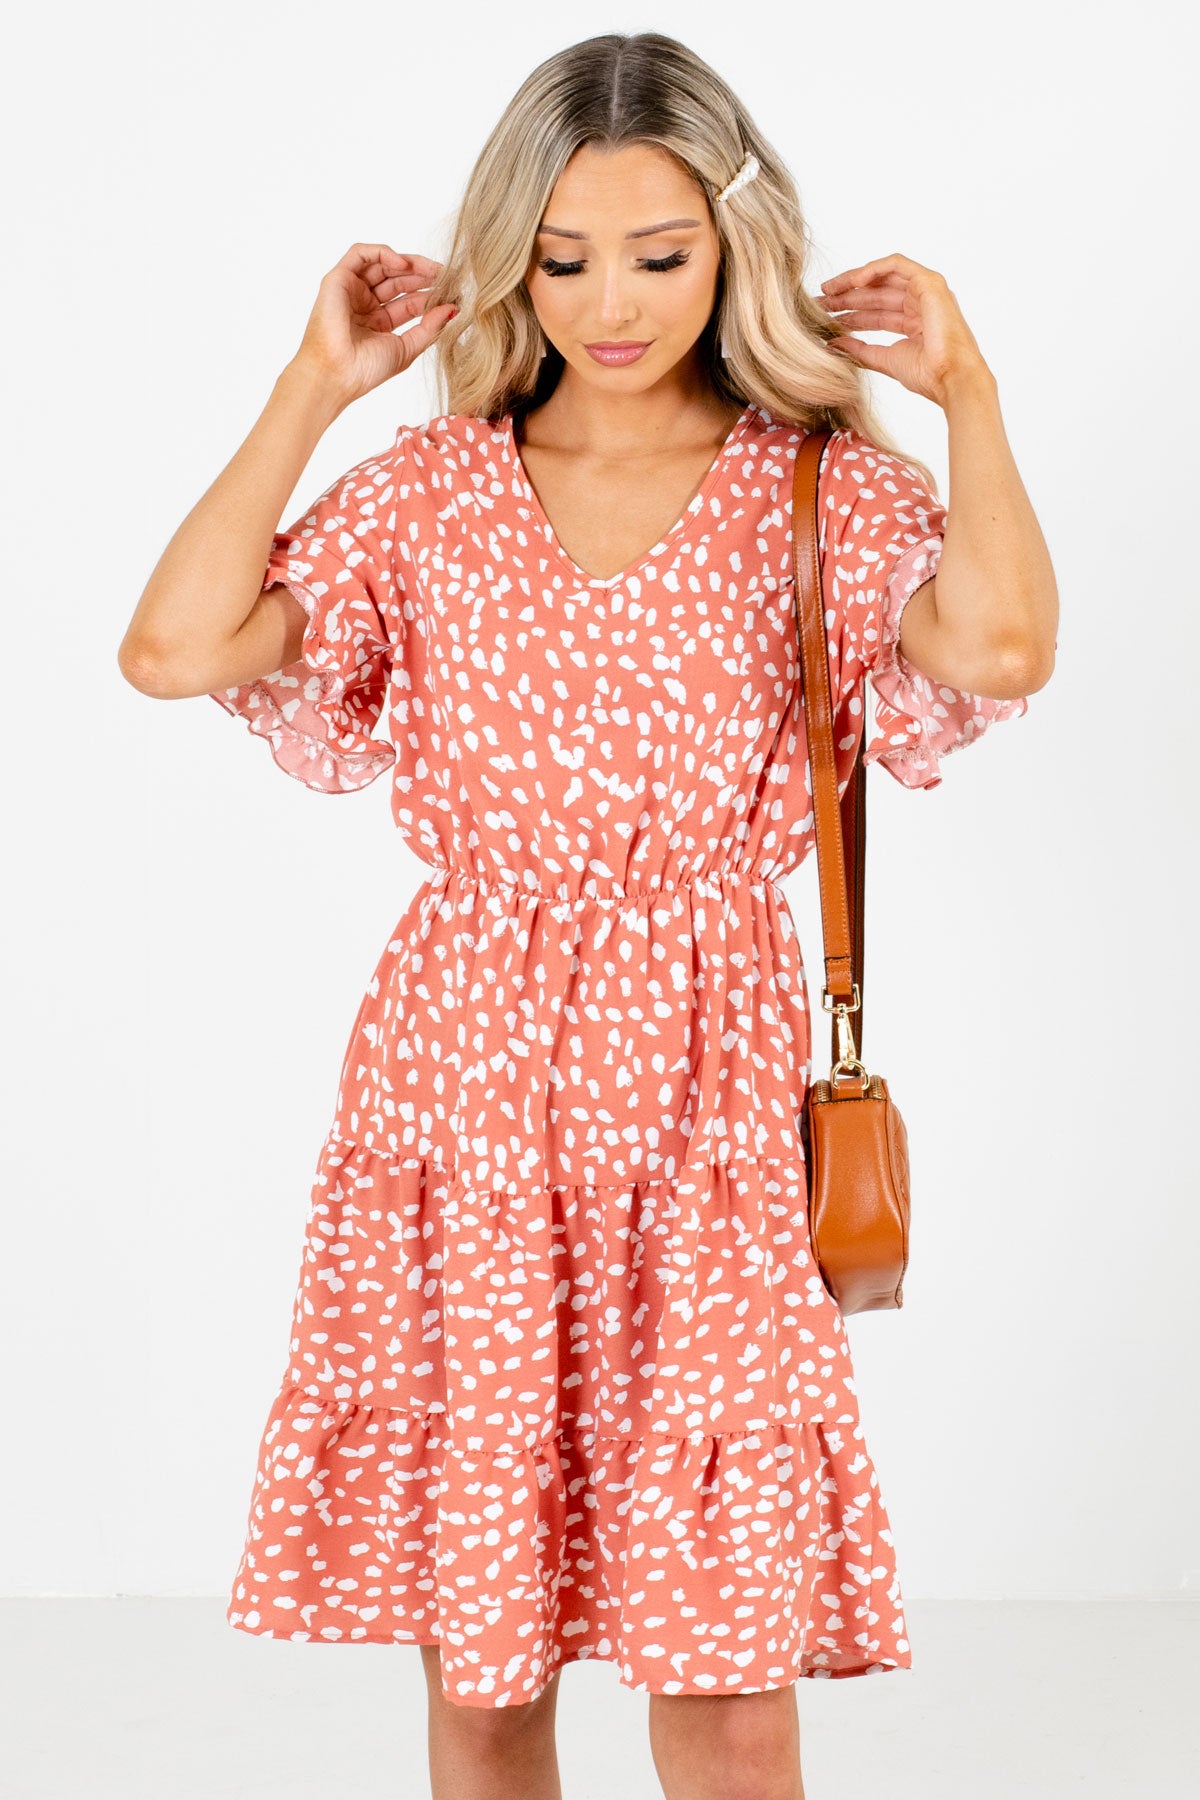 Pink and White Abstract Polka Dot Patterned Boutique Dresses for Women